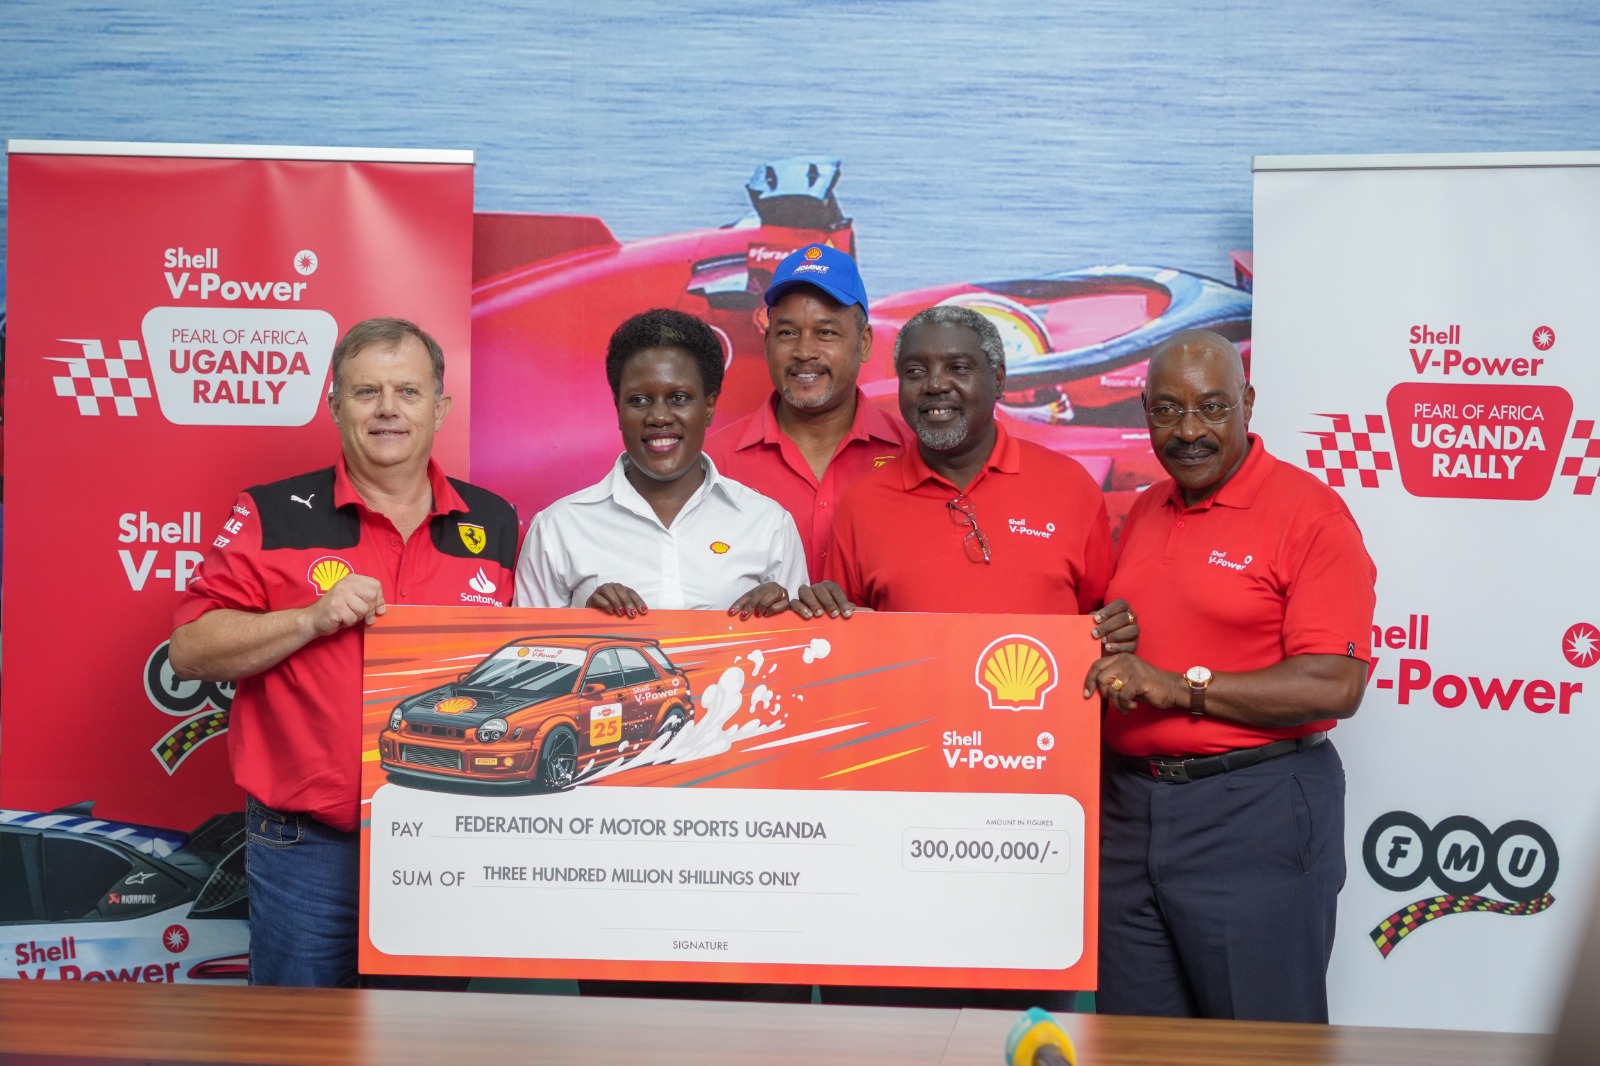 Featured image for Vivo Energy reaffirms ‘Pearl of Africa Uganda Rally’ title sponsorship.